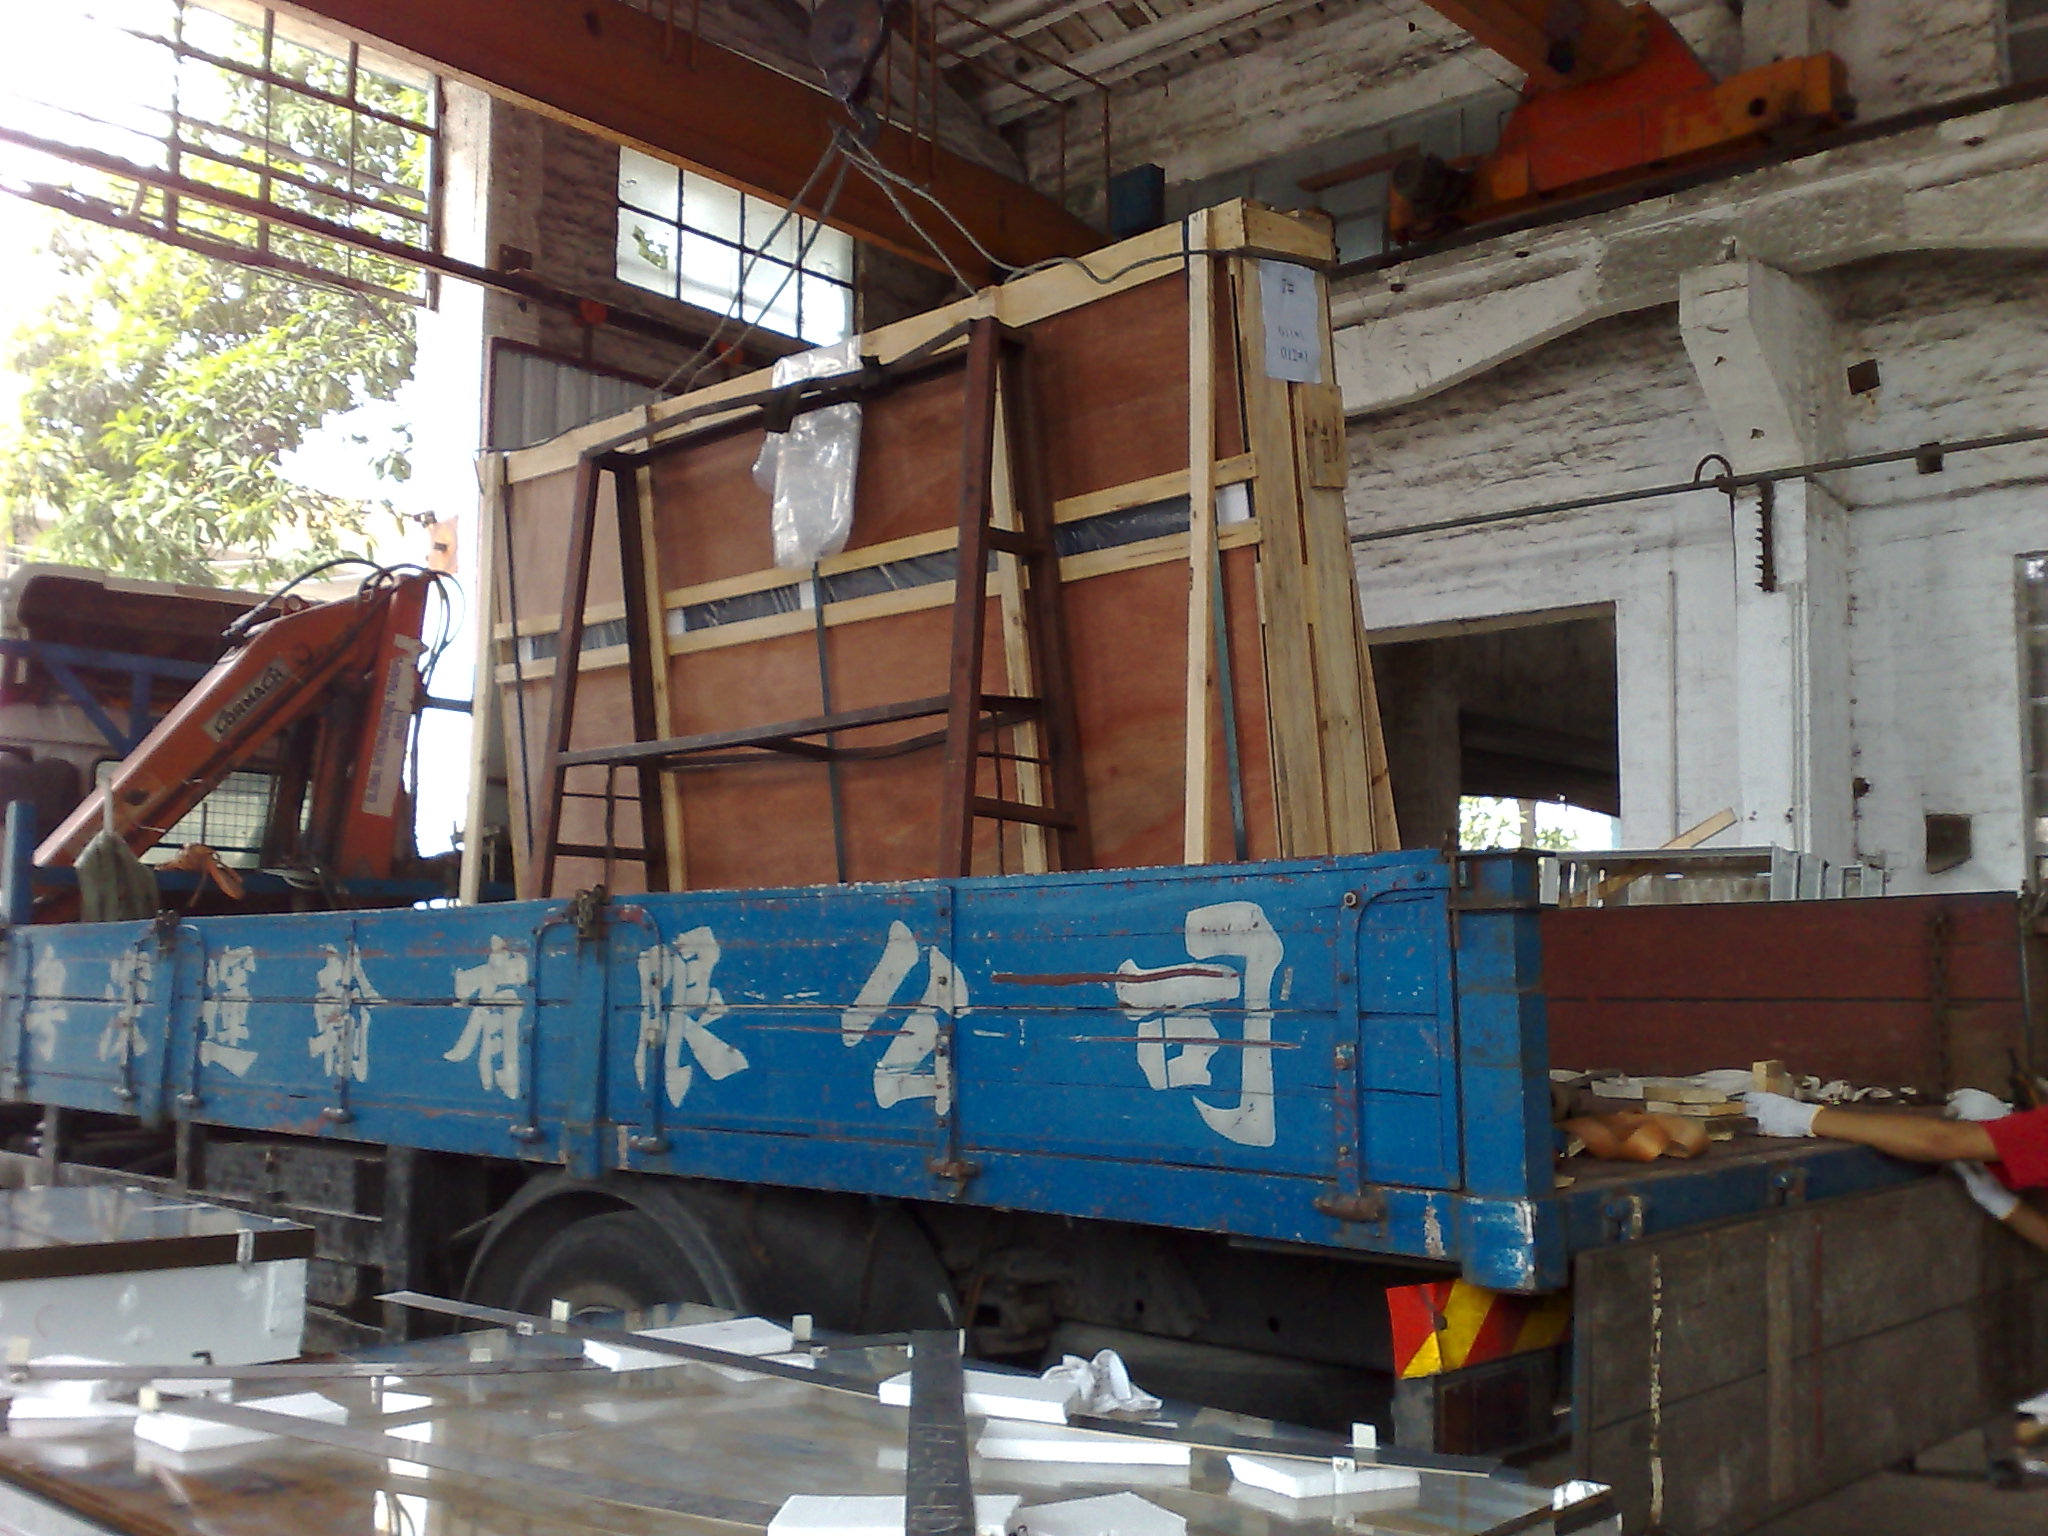 Professional Hanling of Glass 2 - Incline during Land Transportation -